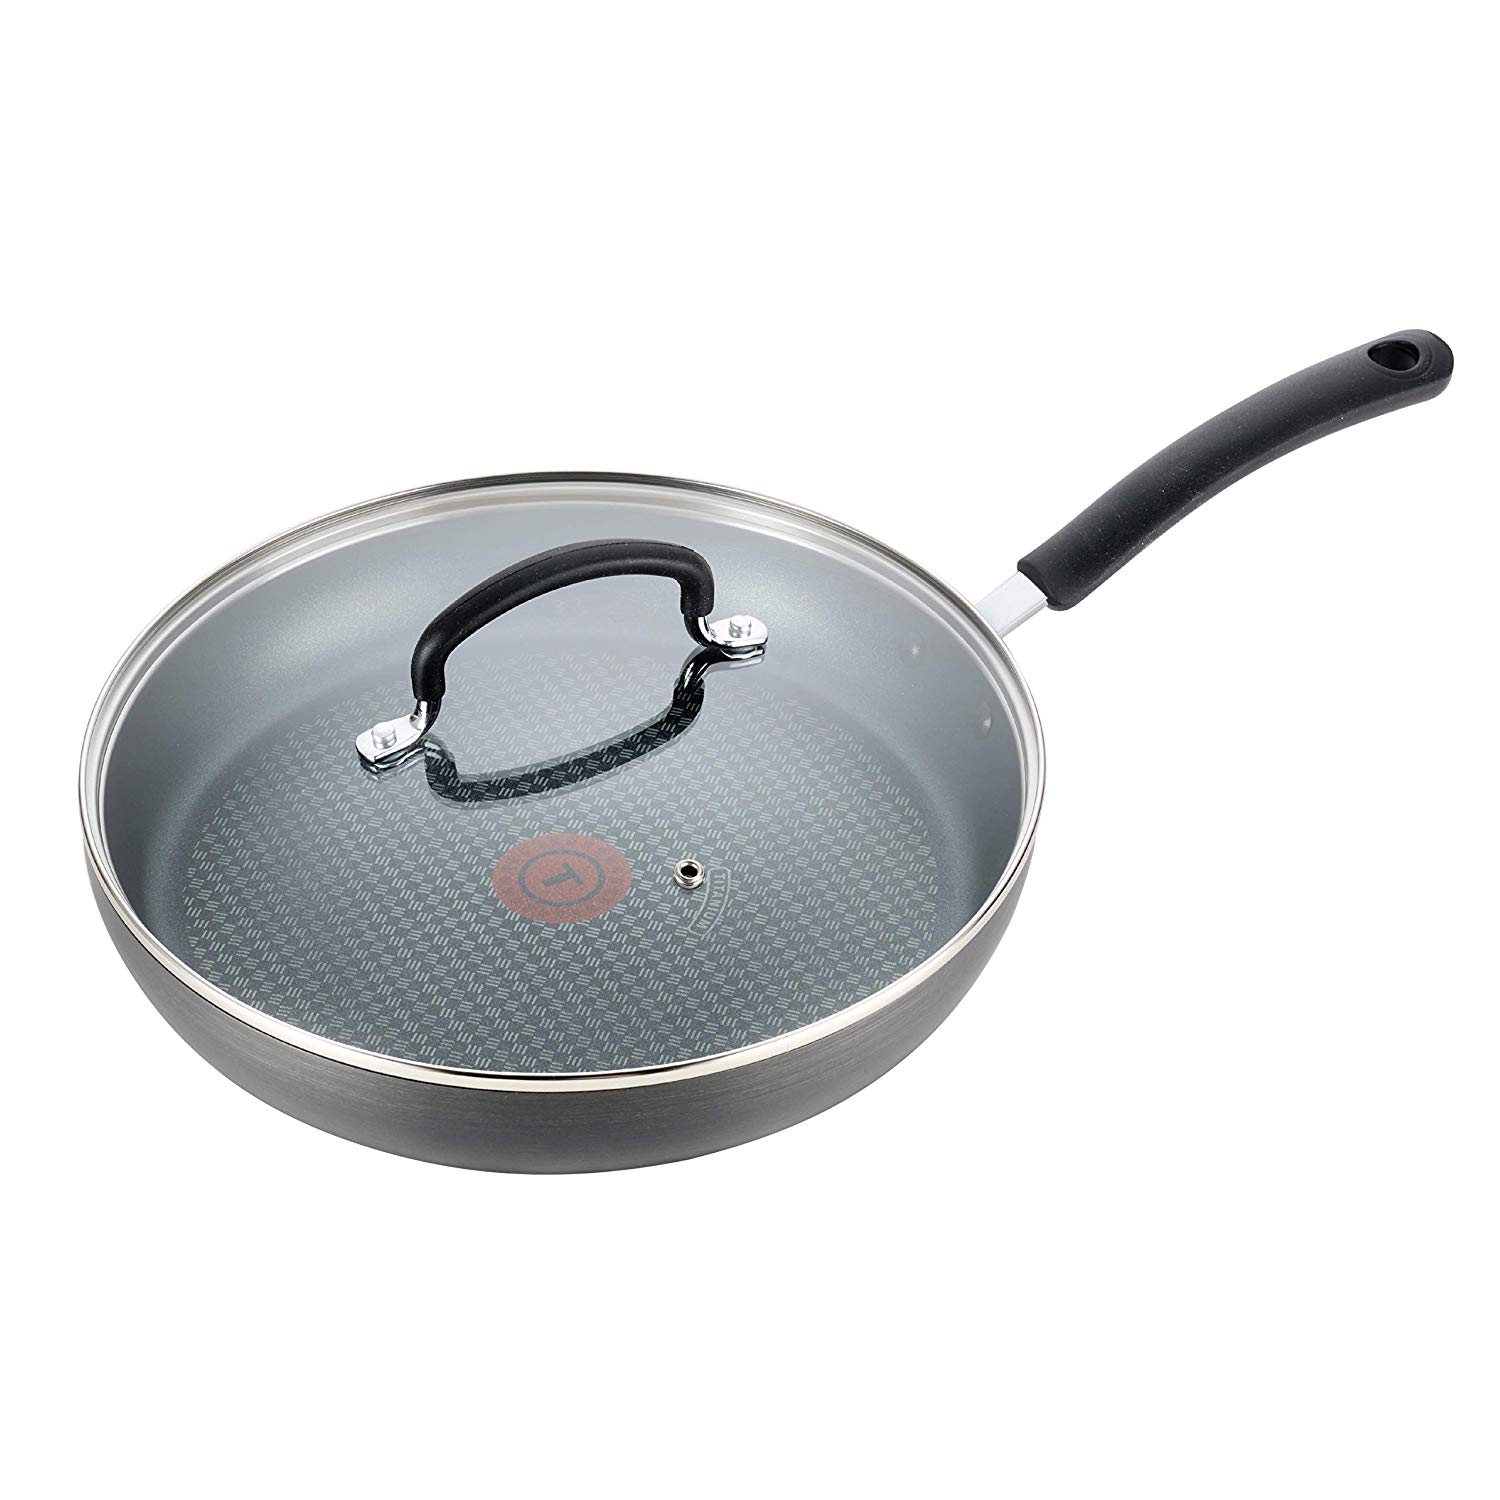 T Fal E76507 Ultimate Hard Anodized Nonstick 12 Inch Fry Pan With Lid Dishwasher Safe Frying Pan Black Nonstick Pan Skillet 